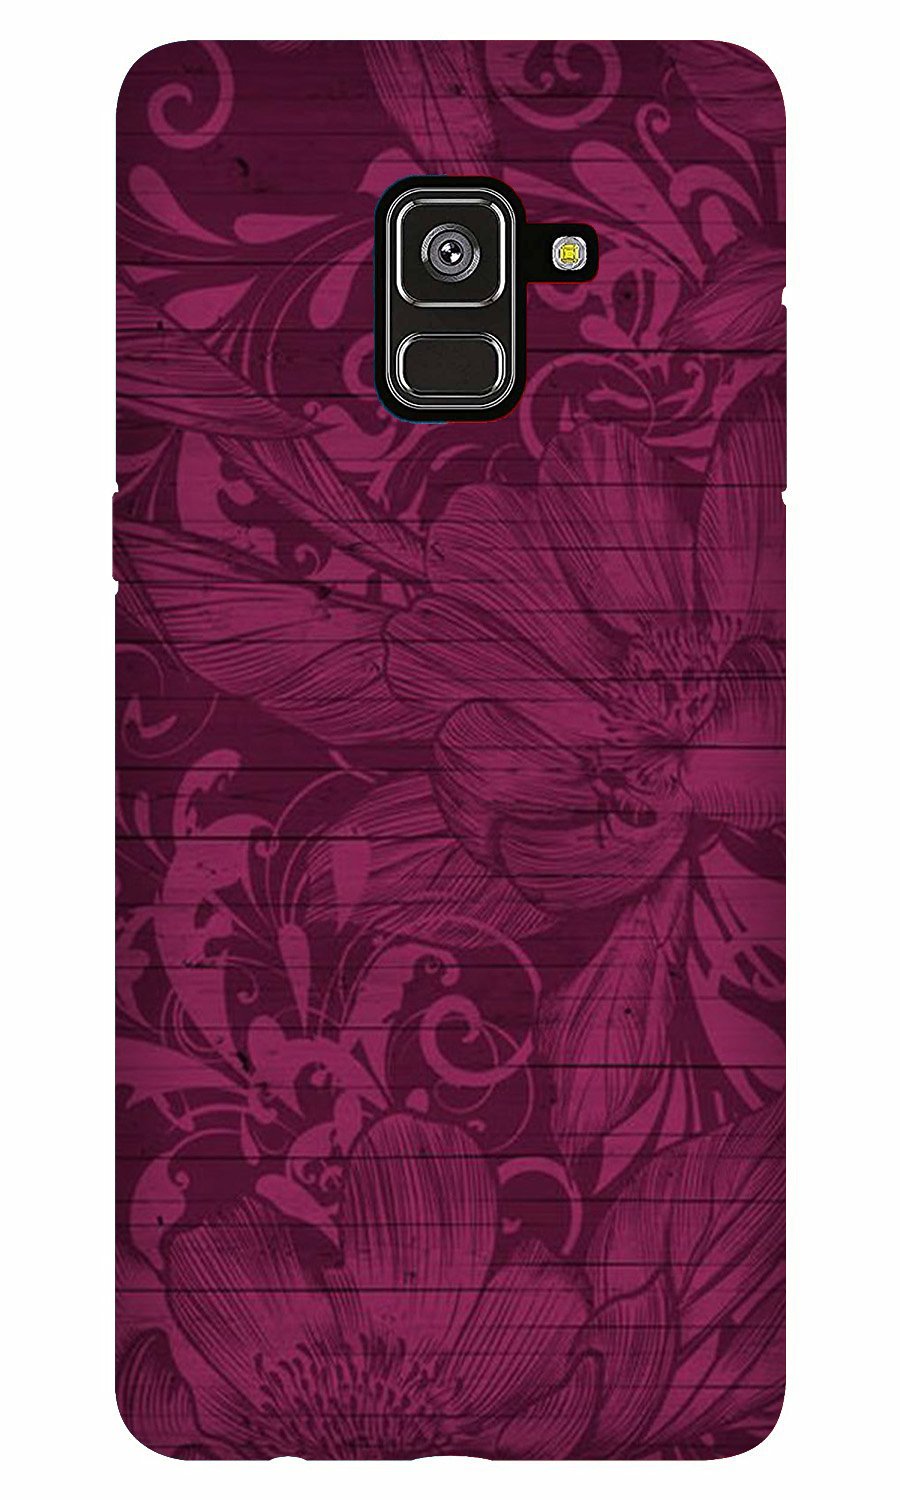 Purple Backround Case for Galaxy A5 (2018)